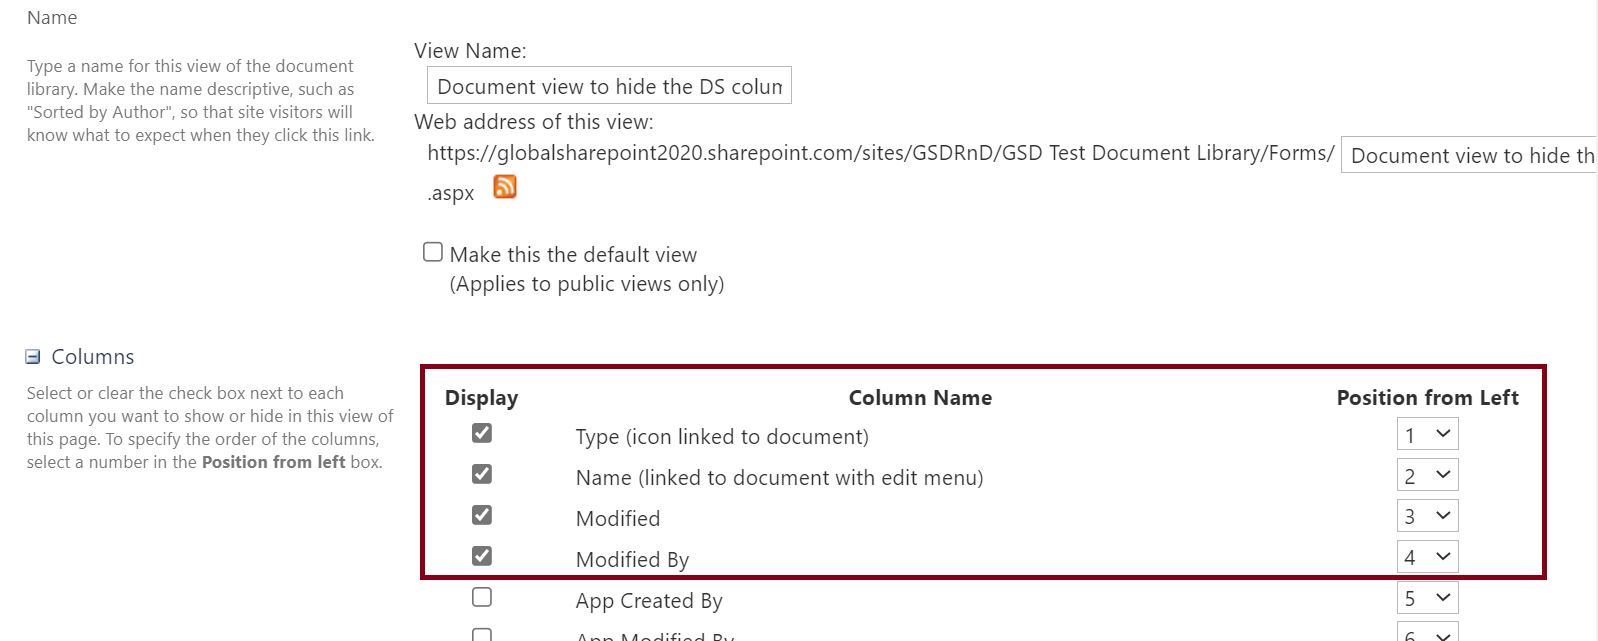 View settings in SharePoint to show hide column